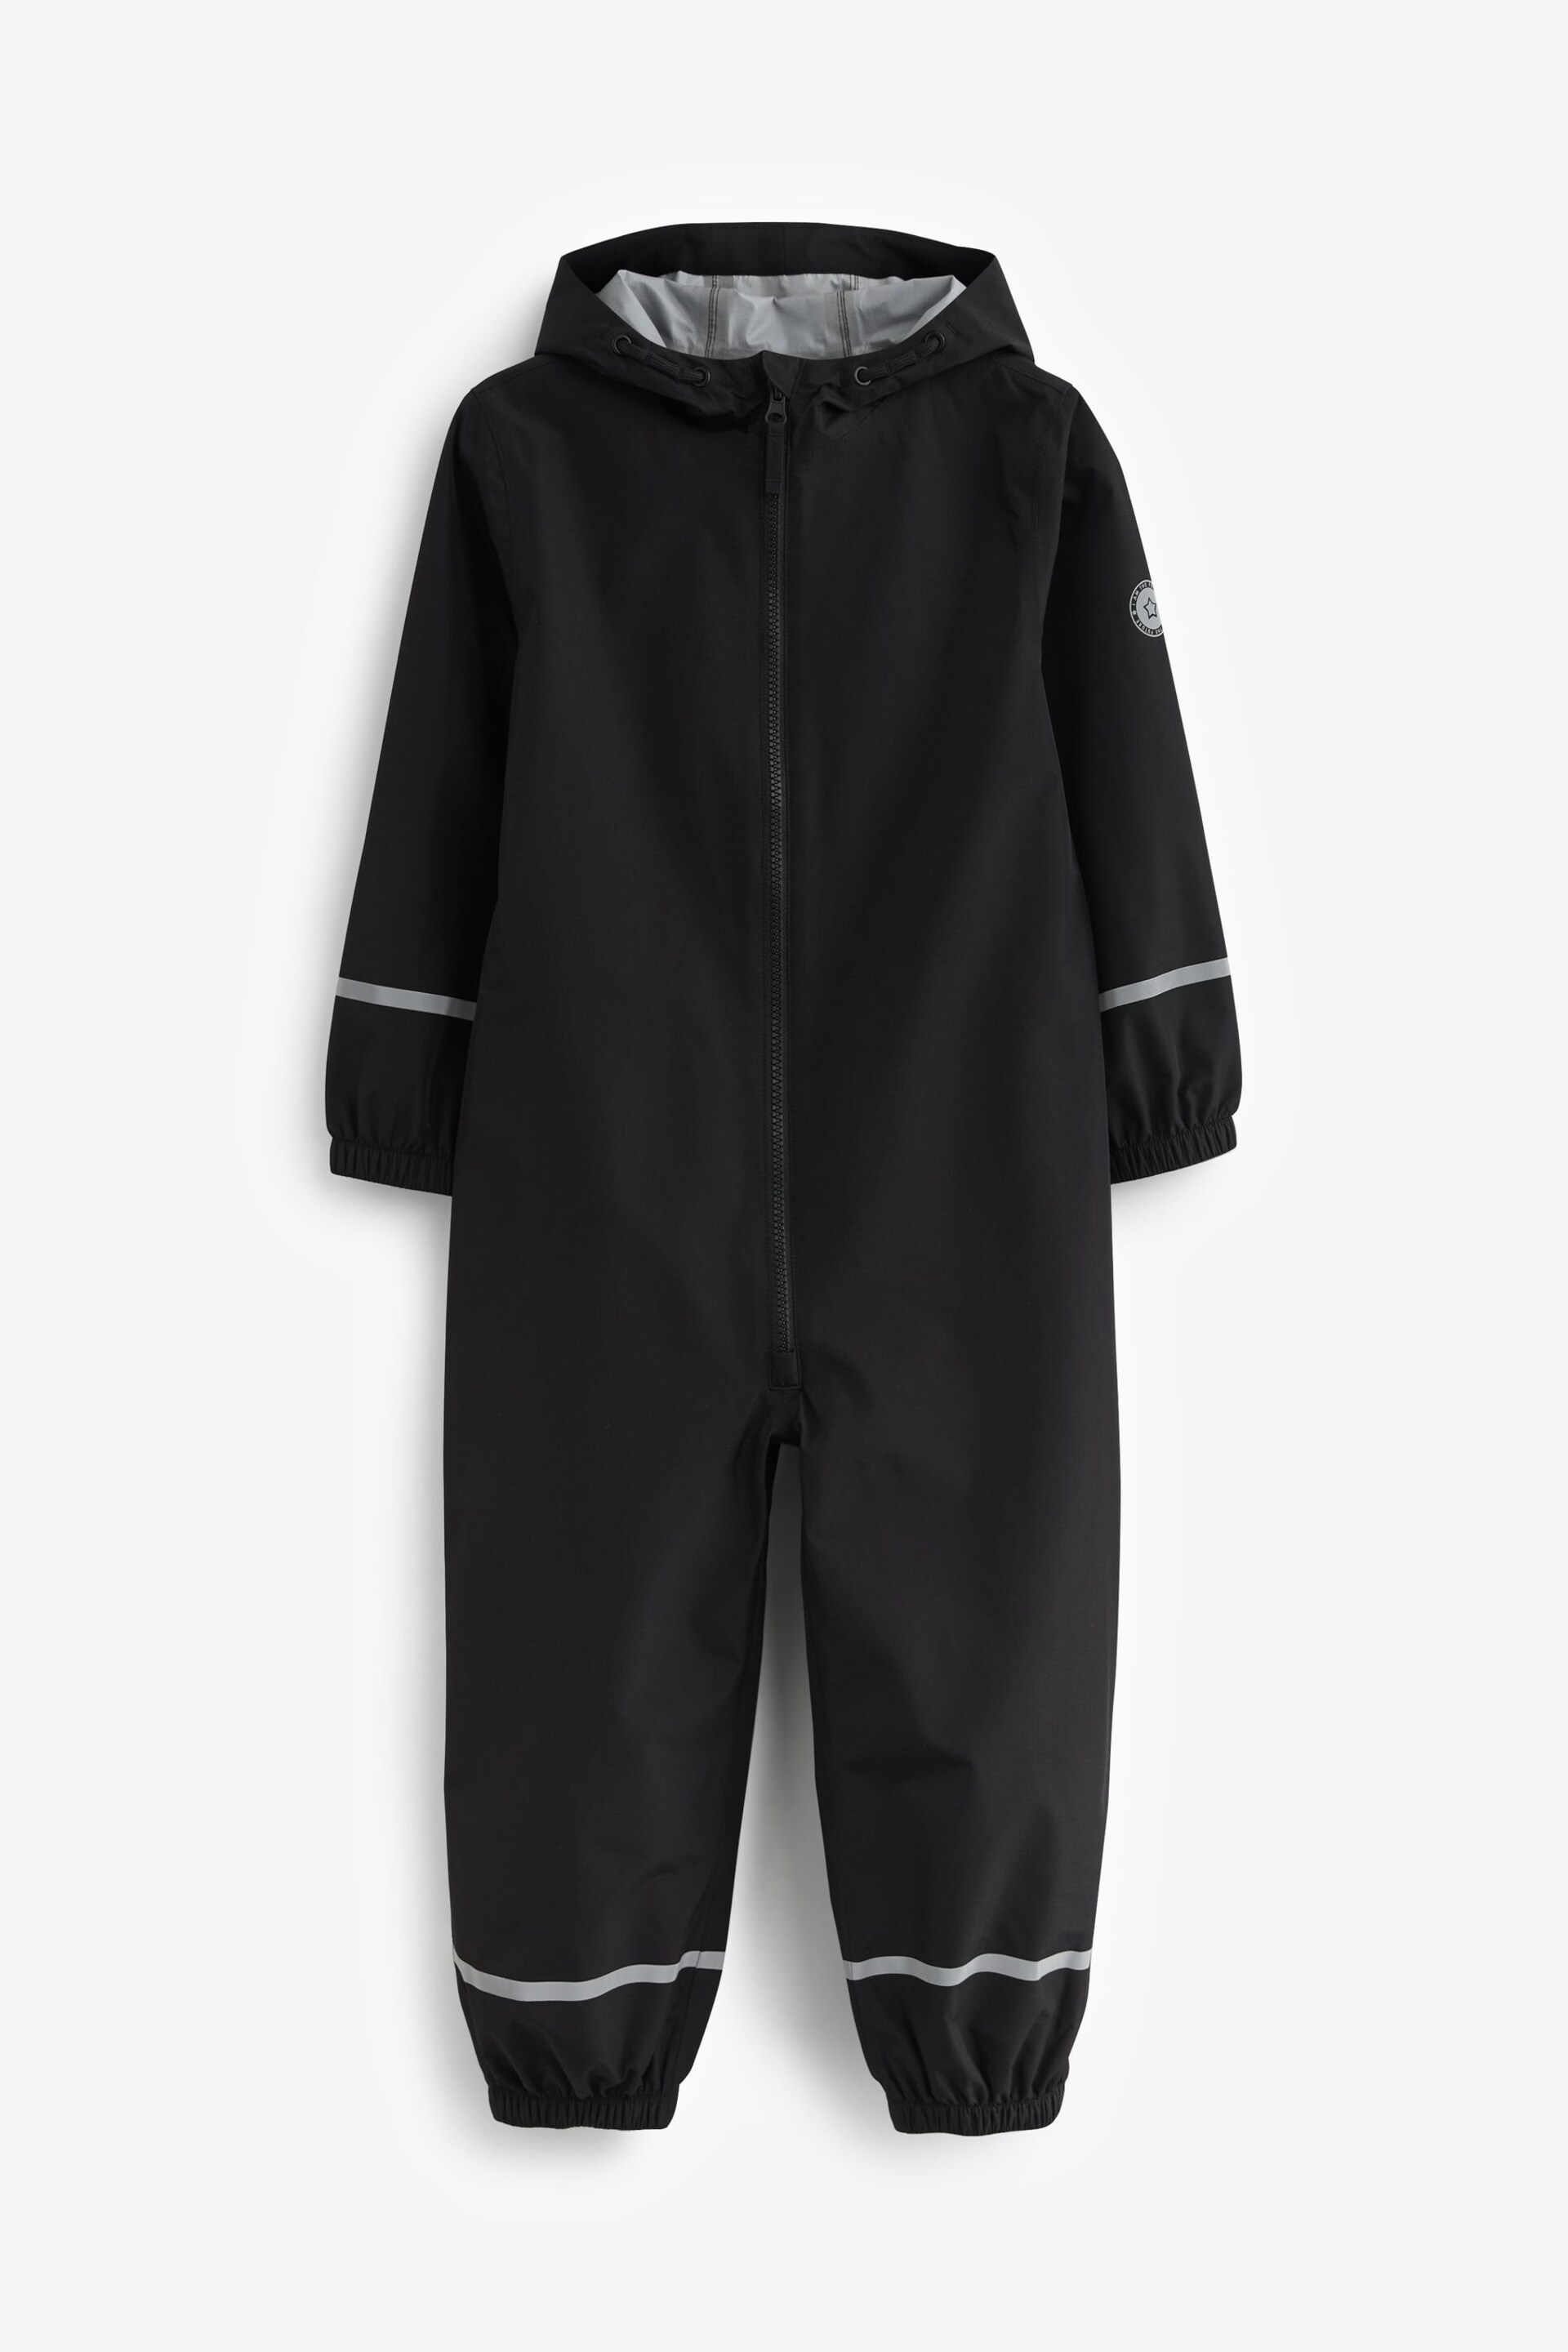 Black Waterproof Puddlesuit (12mths-10yrs) - Image 6 of 7